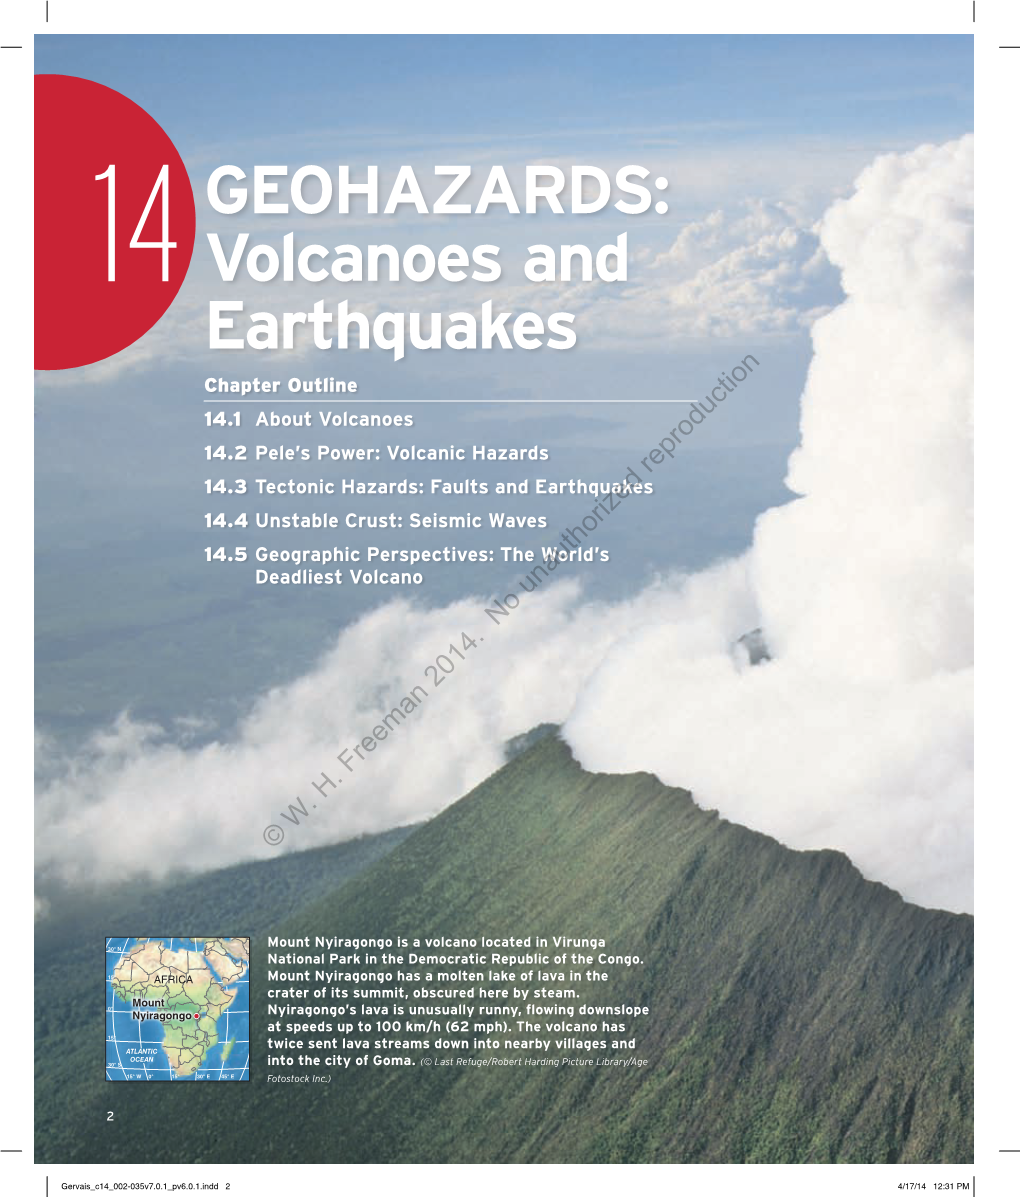 Geohazards: Volcanoes and Earthquakes 5